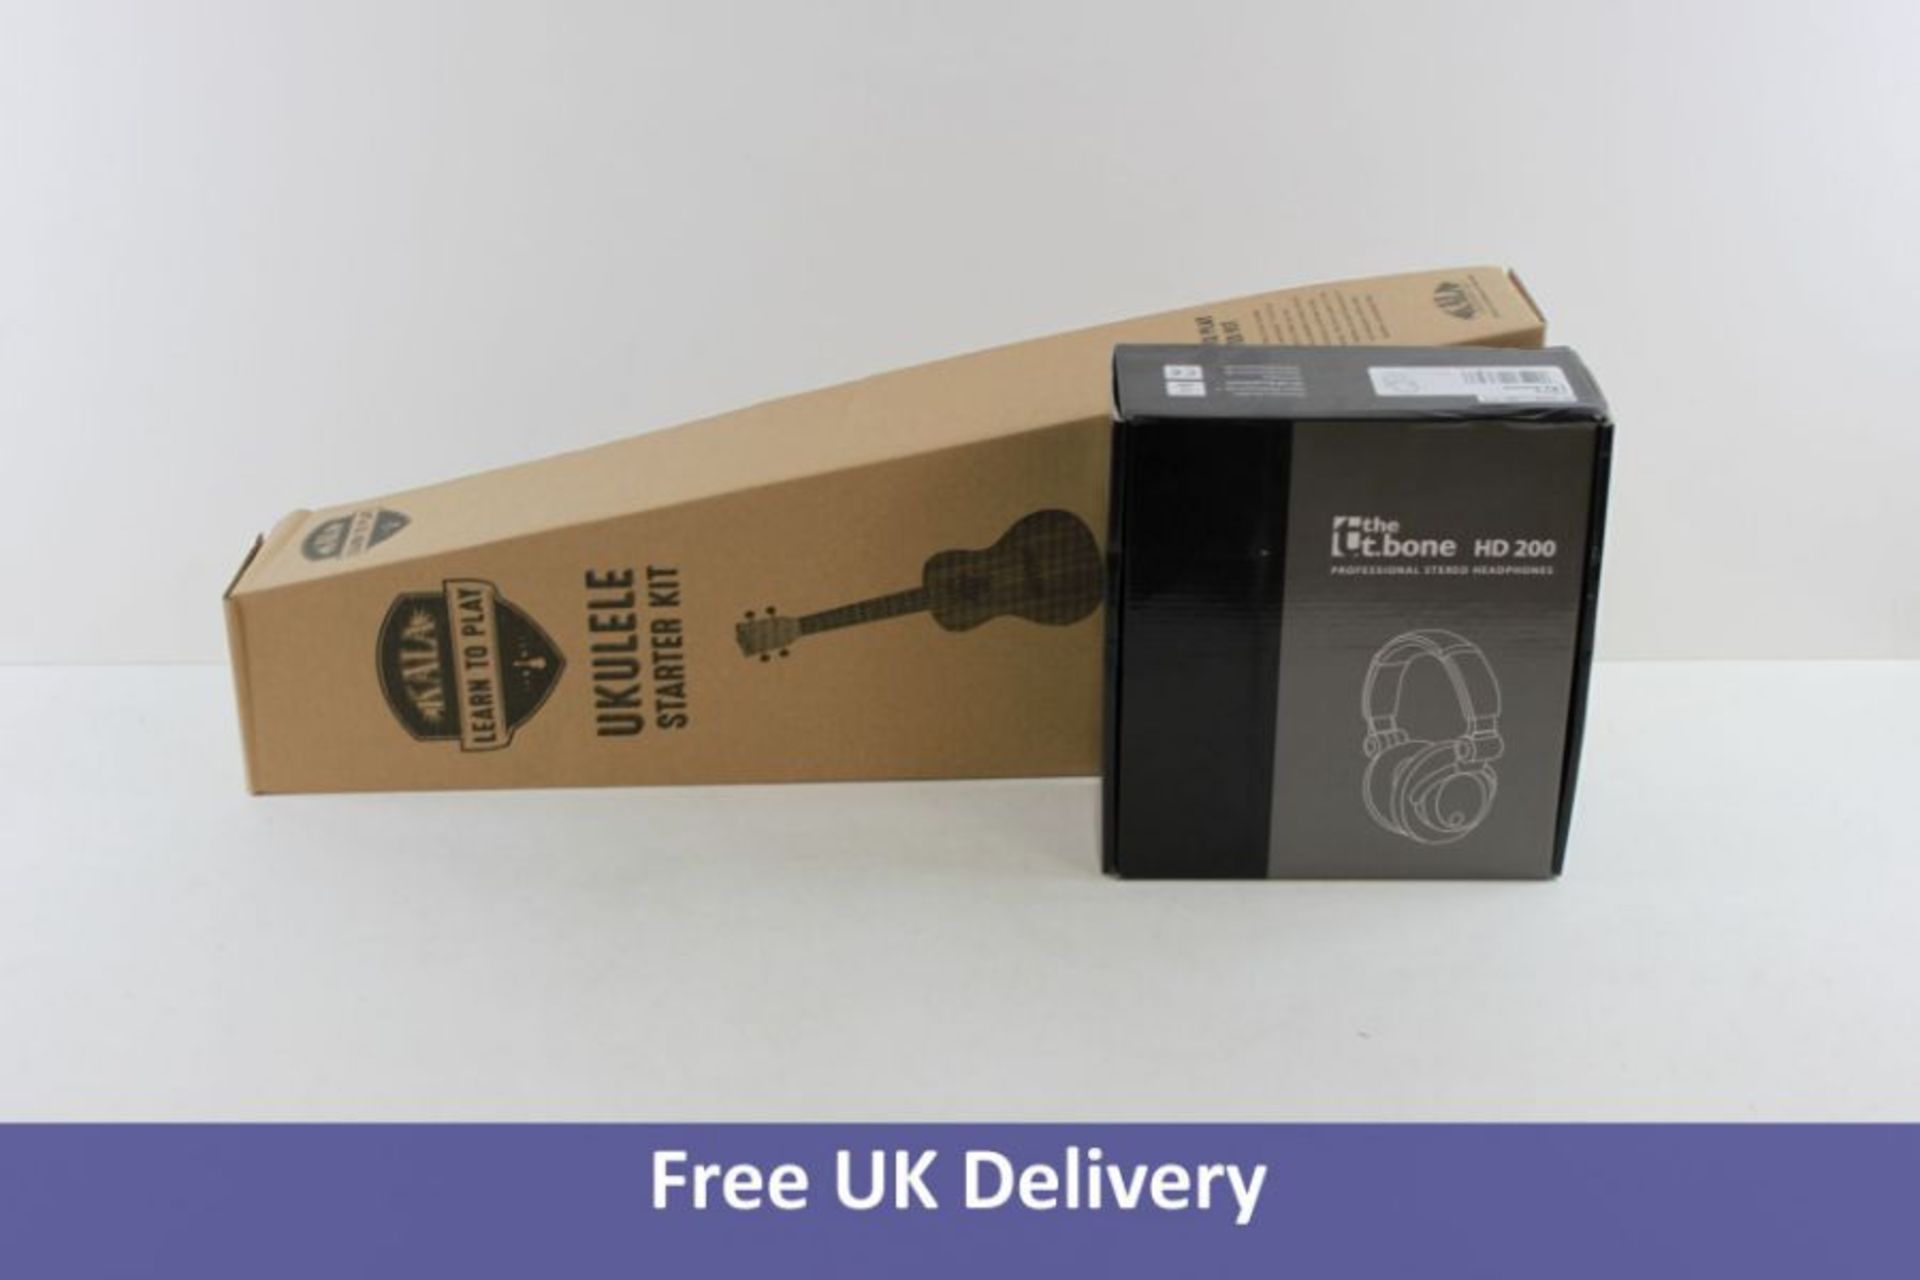 Two Musical Items to Include 1x Kala Ukulele Starter Kit and 1x The T Bone Hd200 Professional Stereo